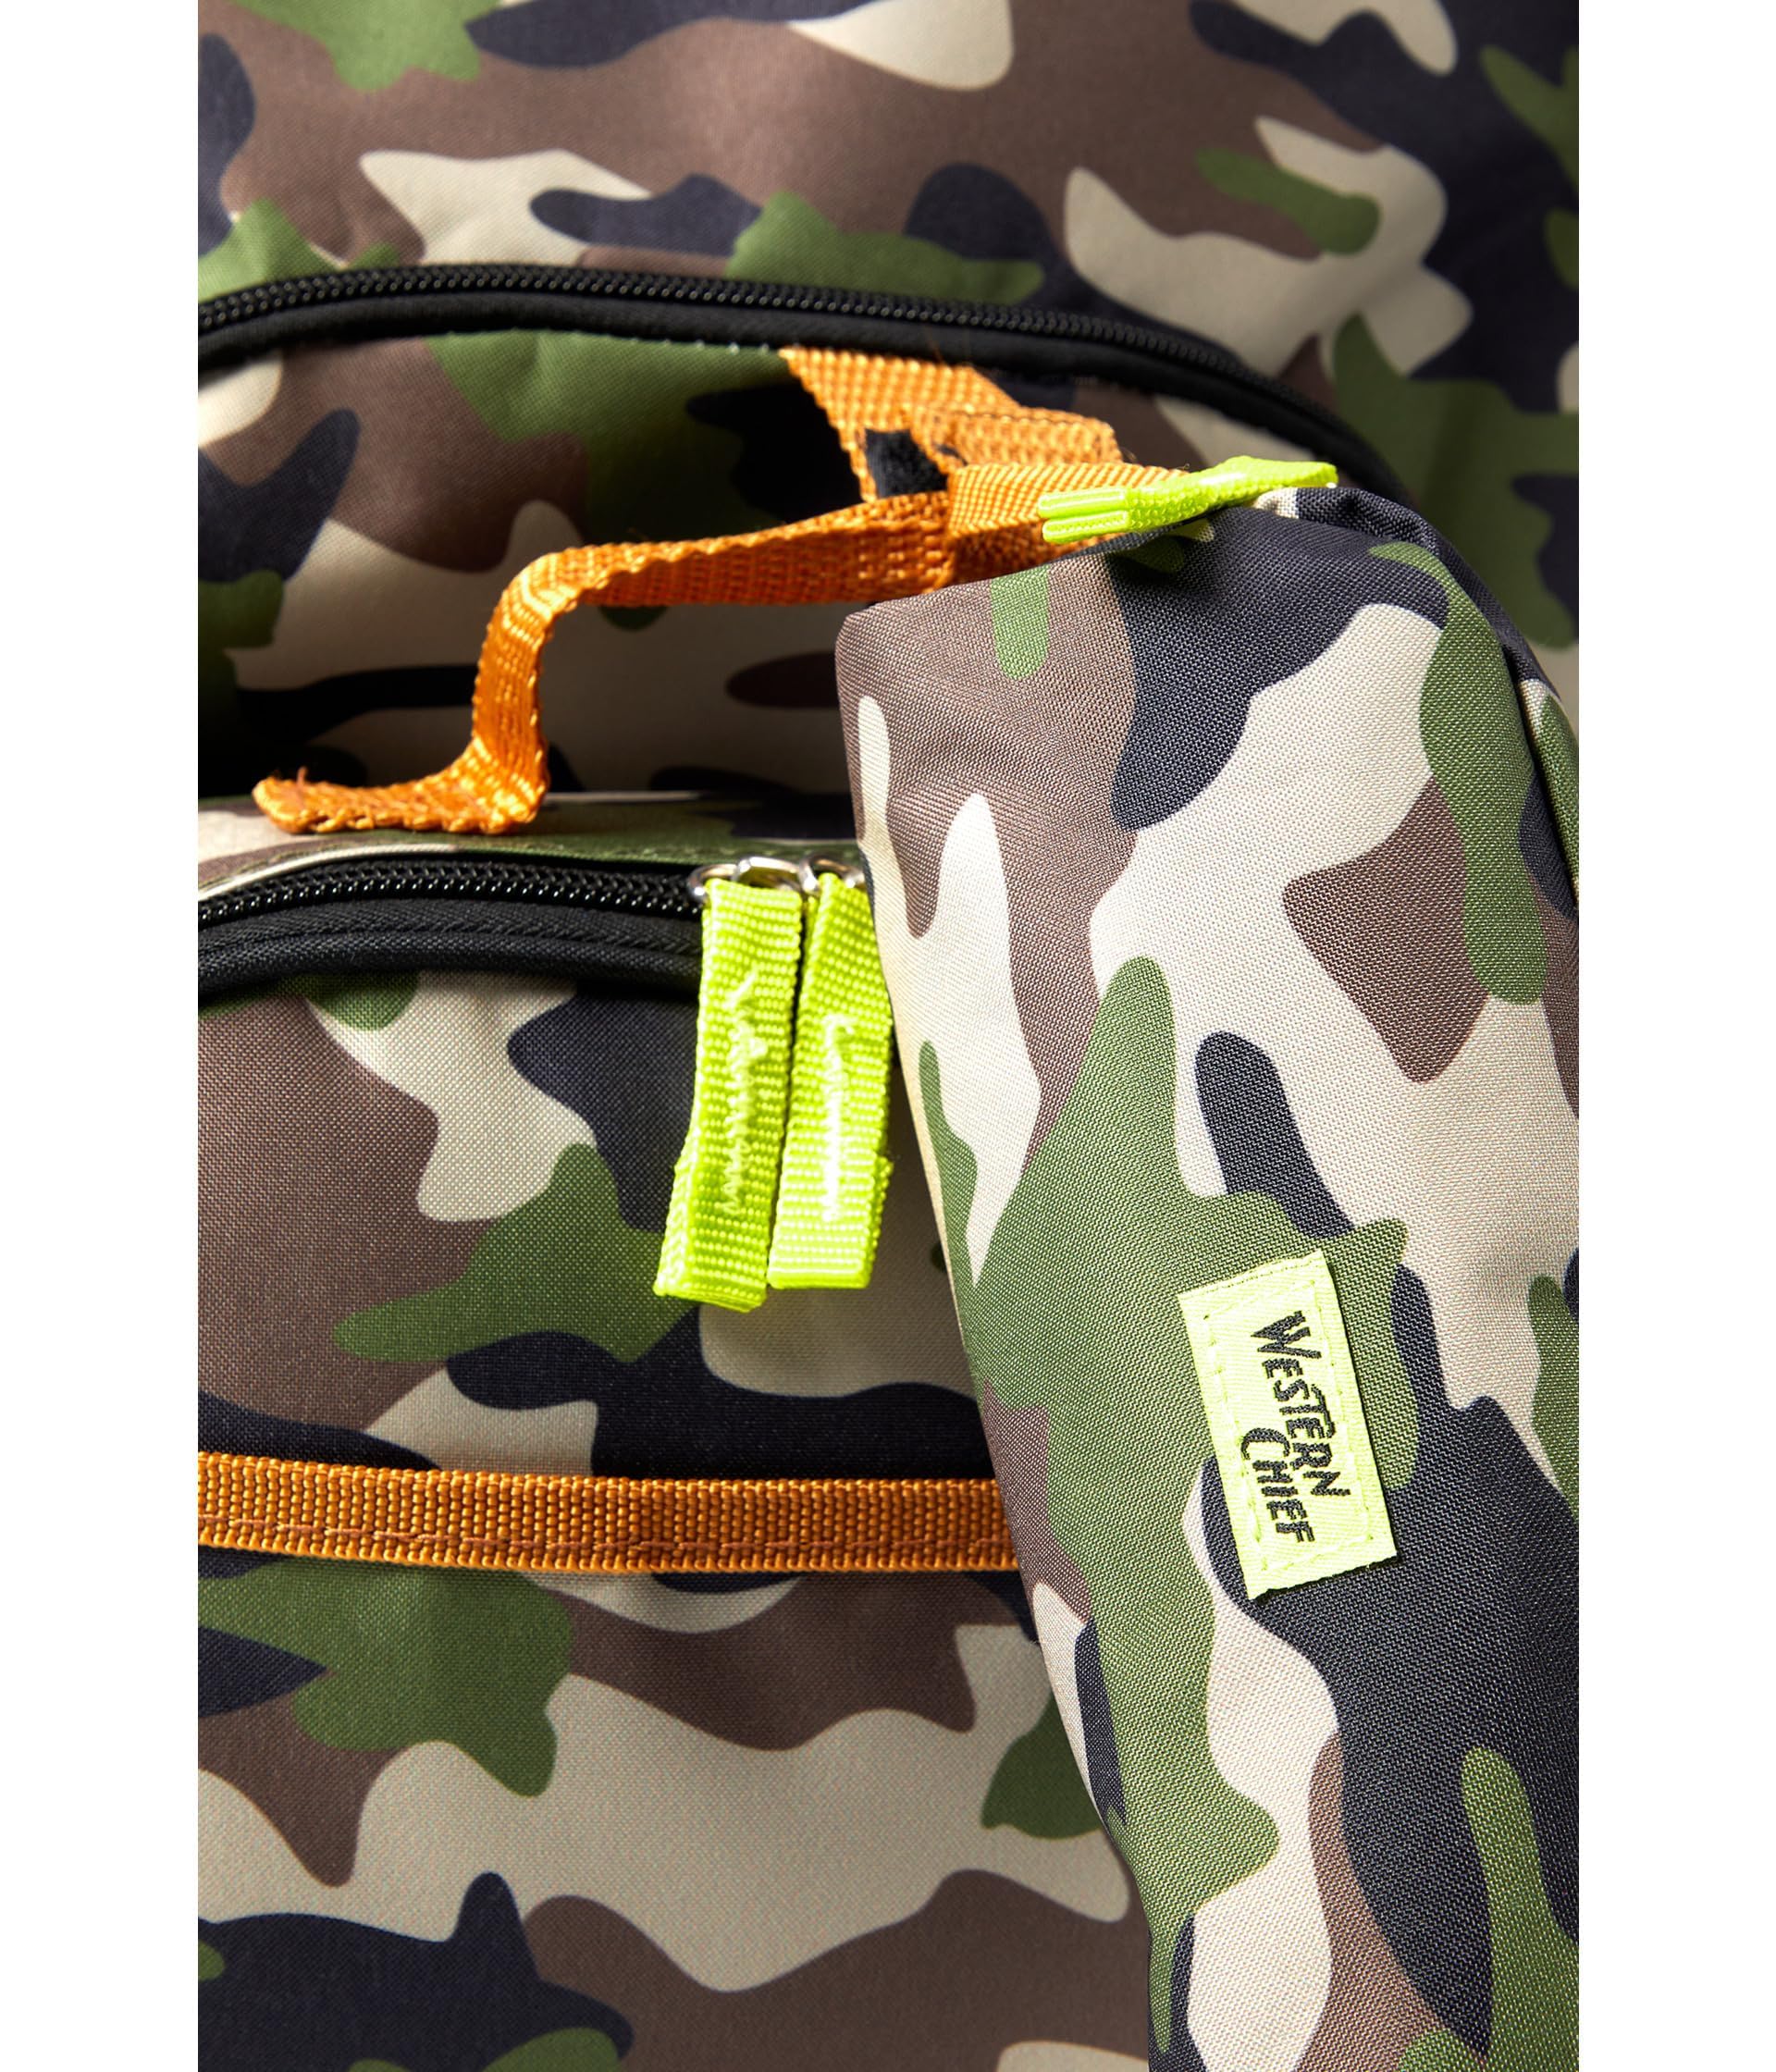 Western Chief Multi Compartment Backpack Bundle w/Lunch Box & Pencil Pouch Camo One Size